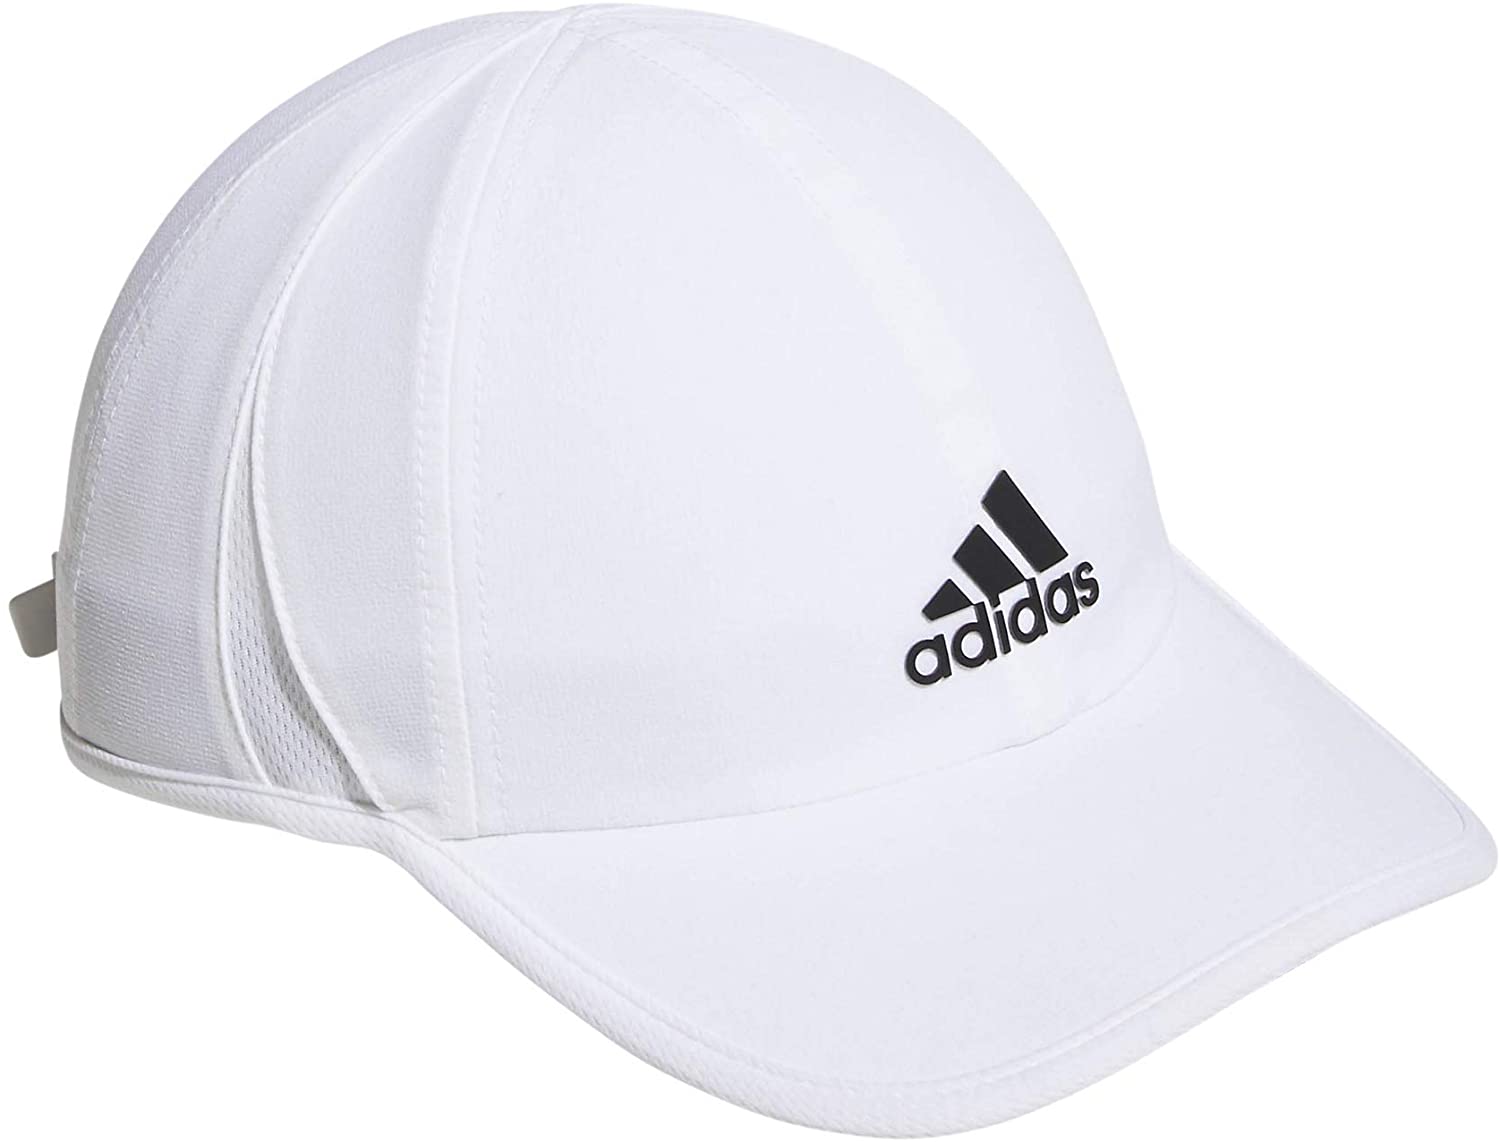 Adidas Men's Superlite Relaxed Fit Performance Hat $11